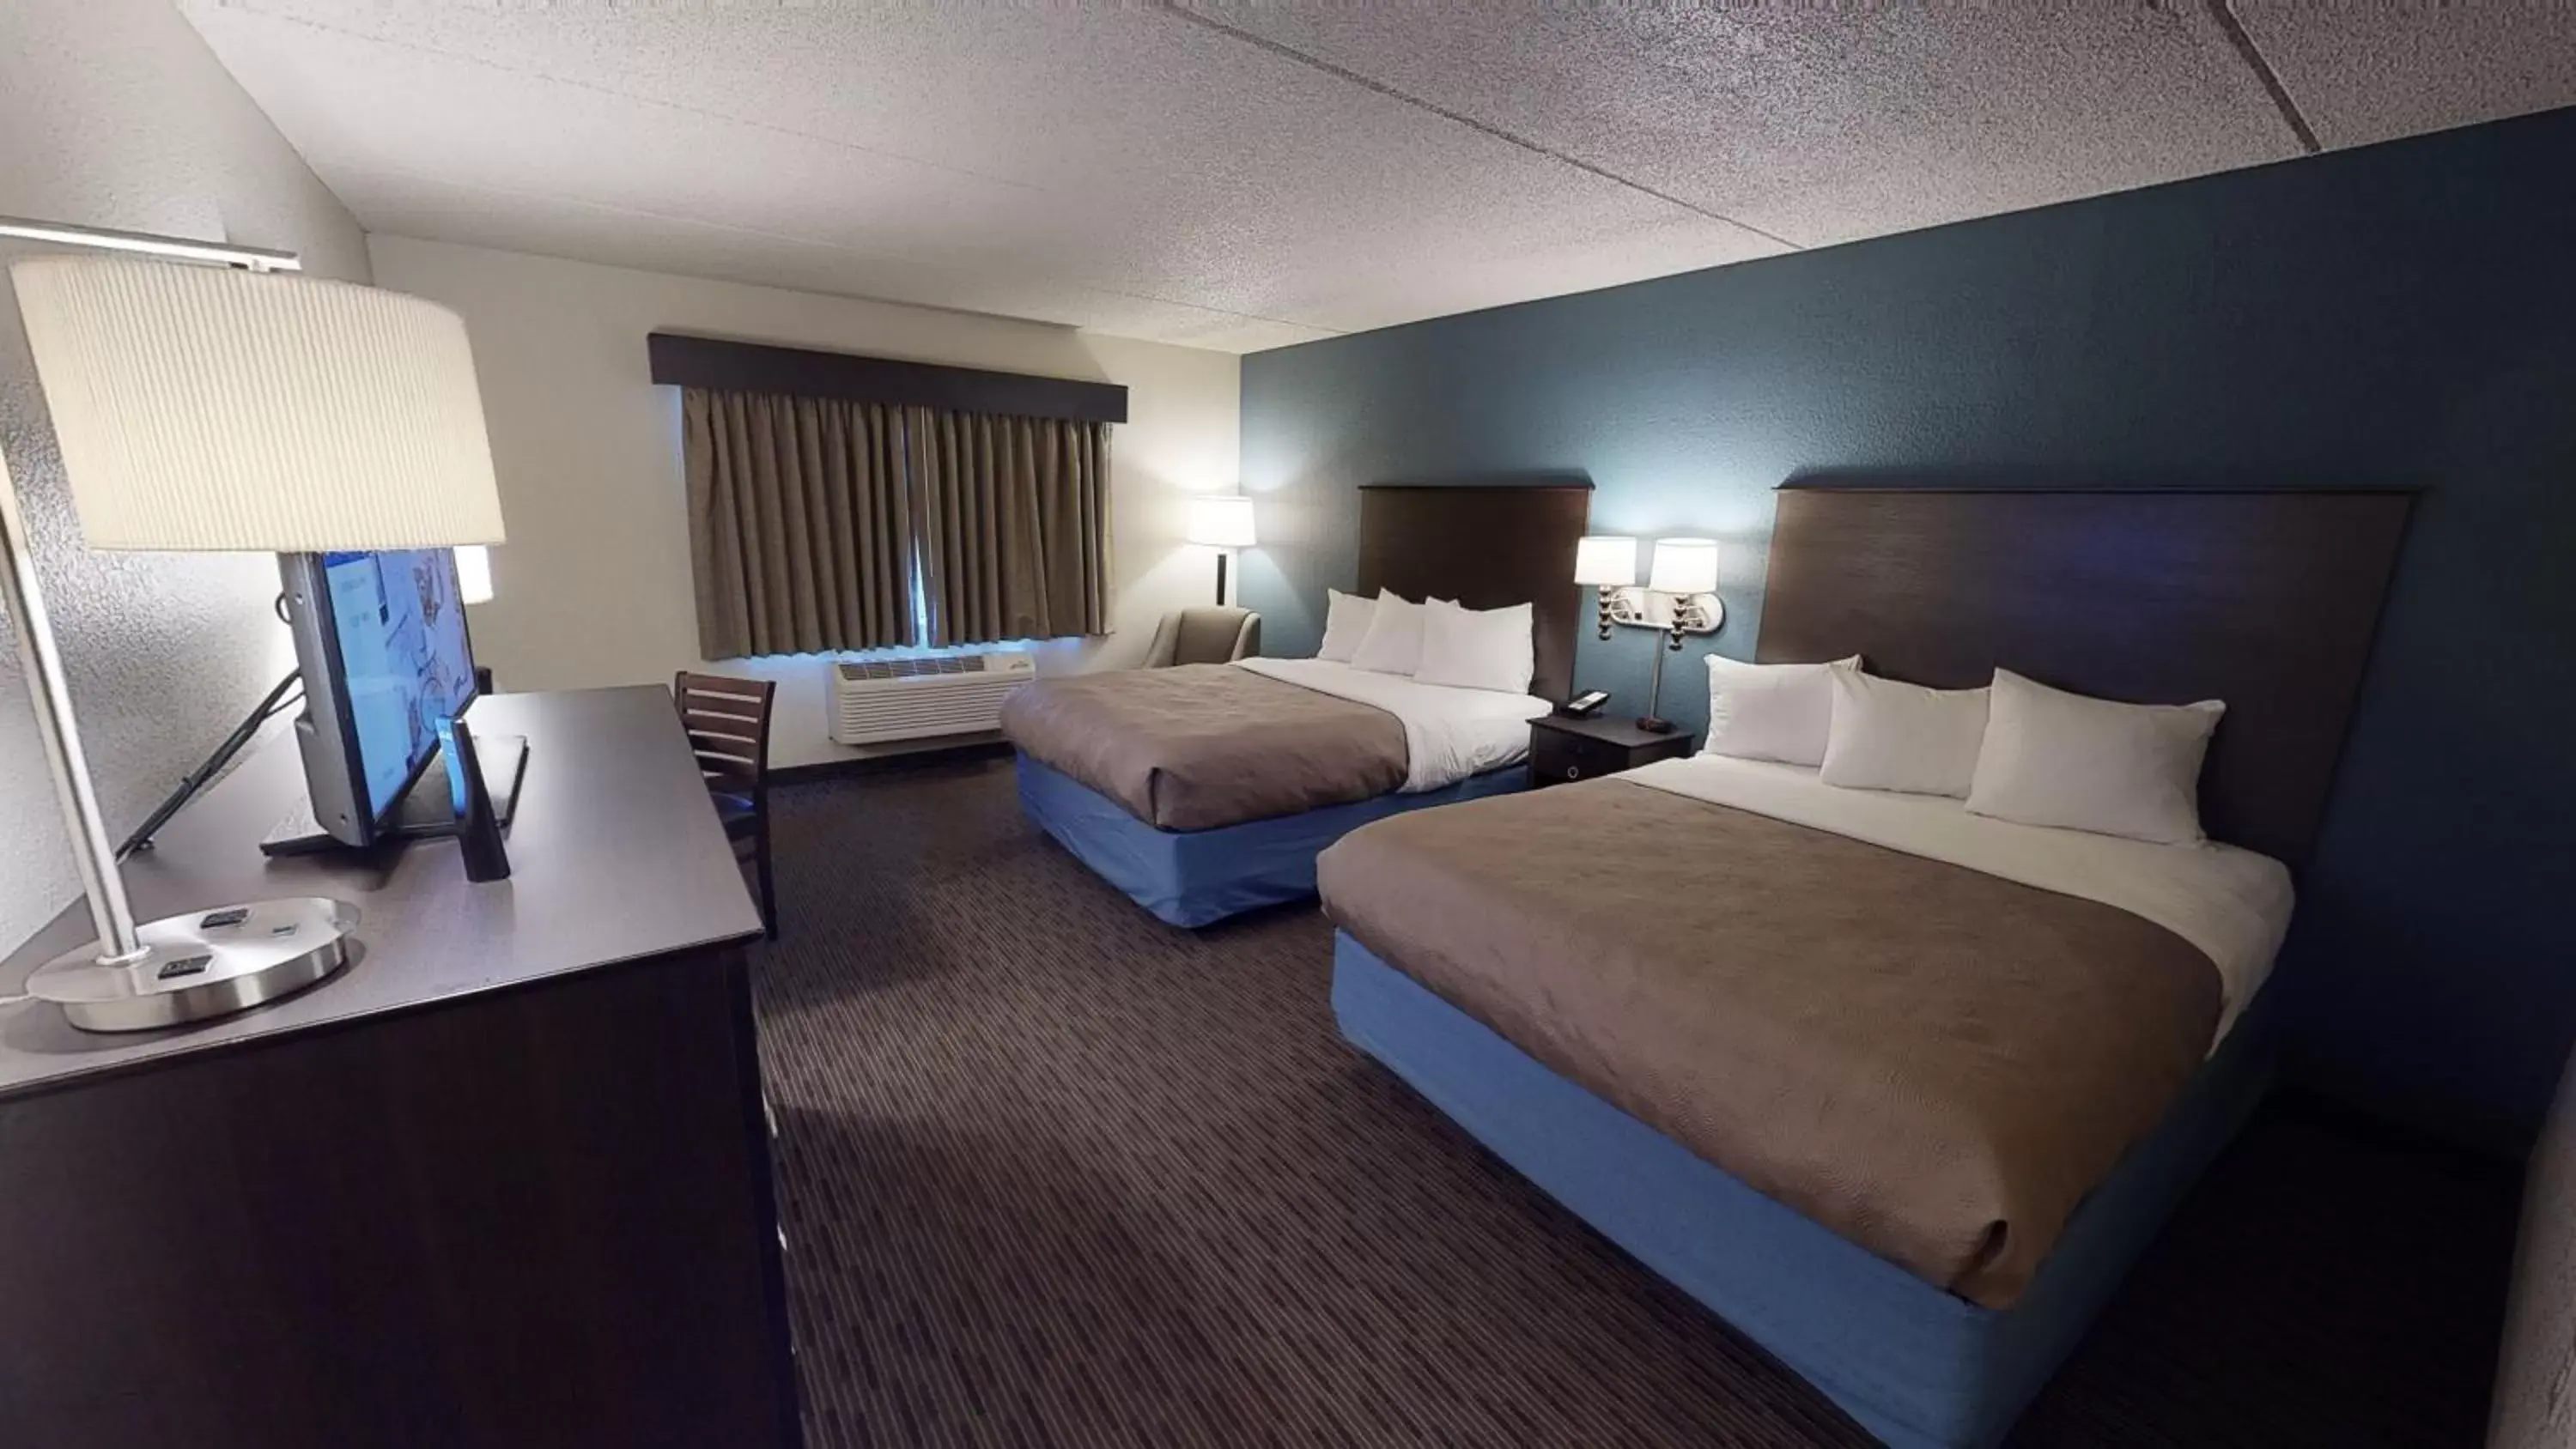 Bedroom in AmericInn by Wyndham Mounds View Minneapolis